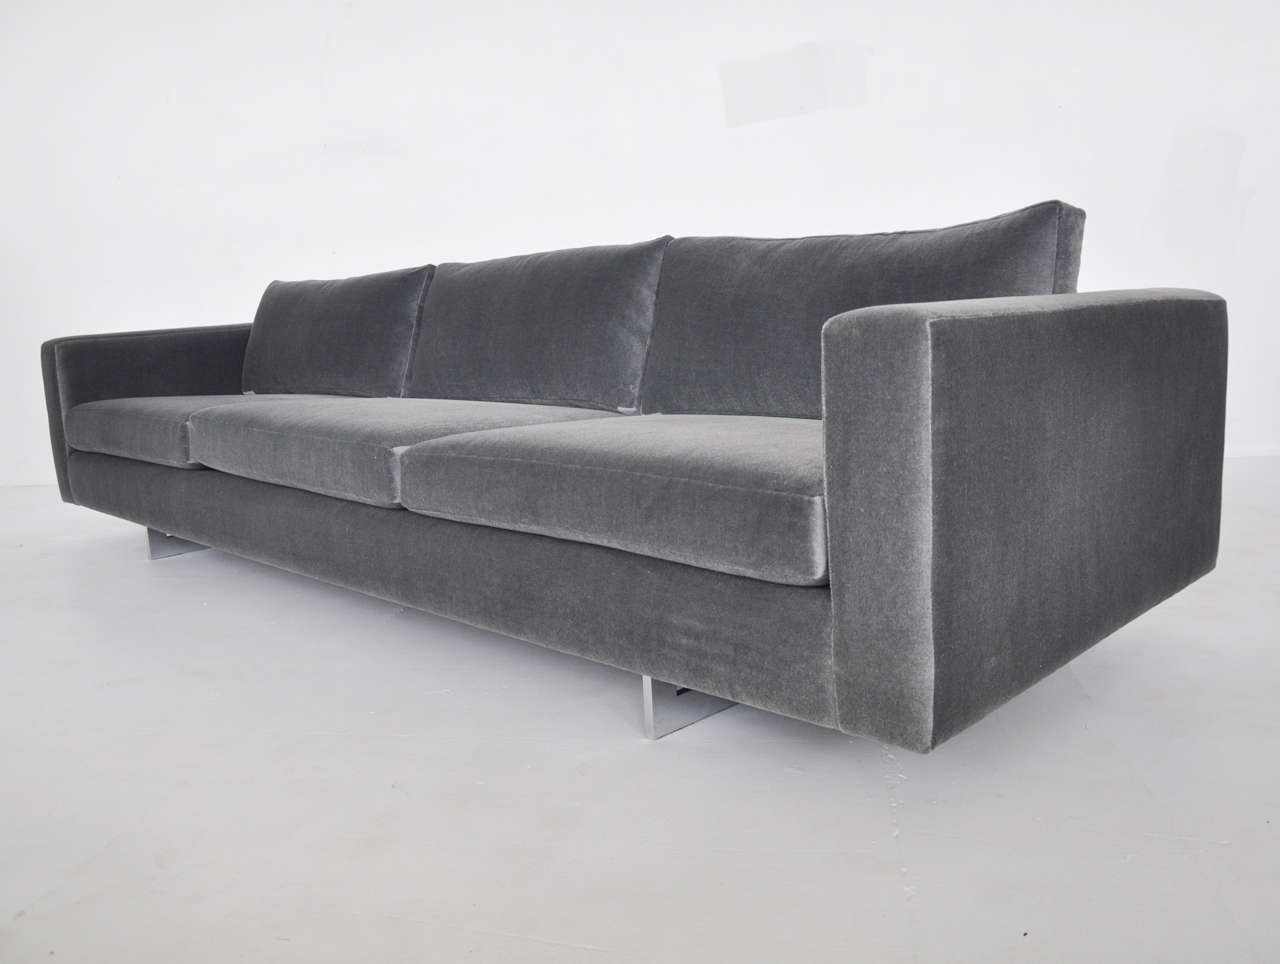 9ft sofa by Jens Risom. Newly upholstered in charcoal mohair. Polished chrome sled bases.